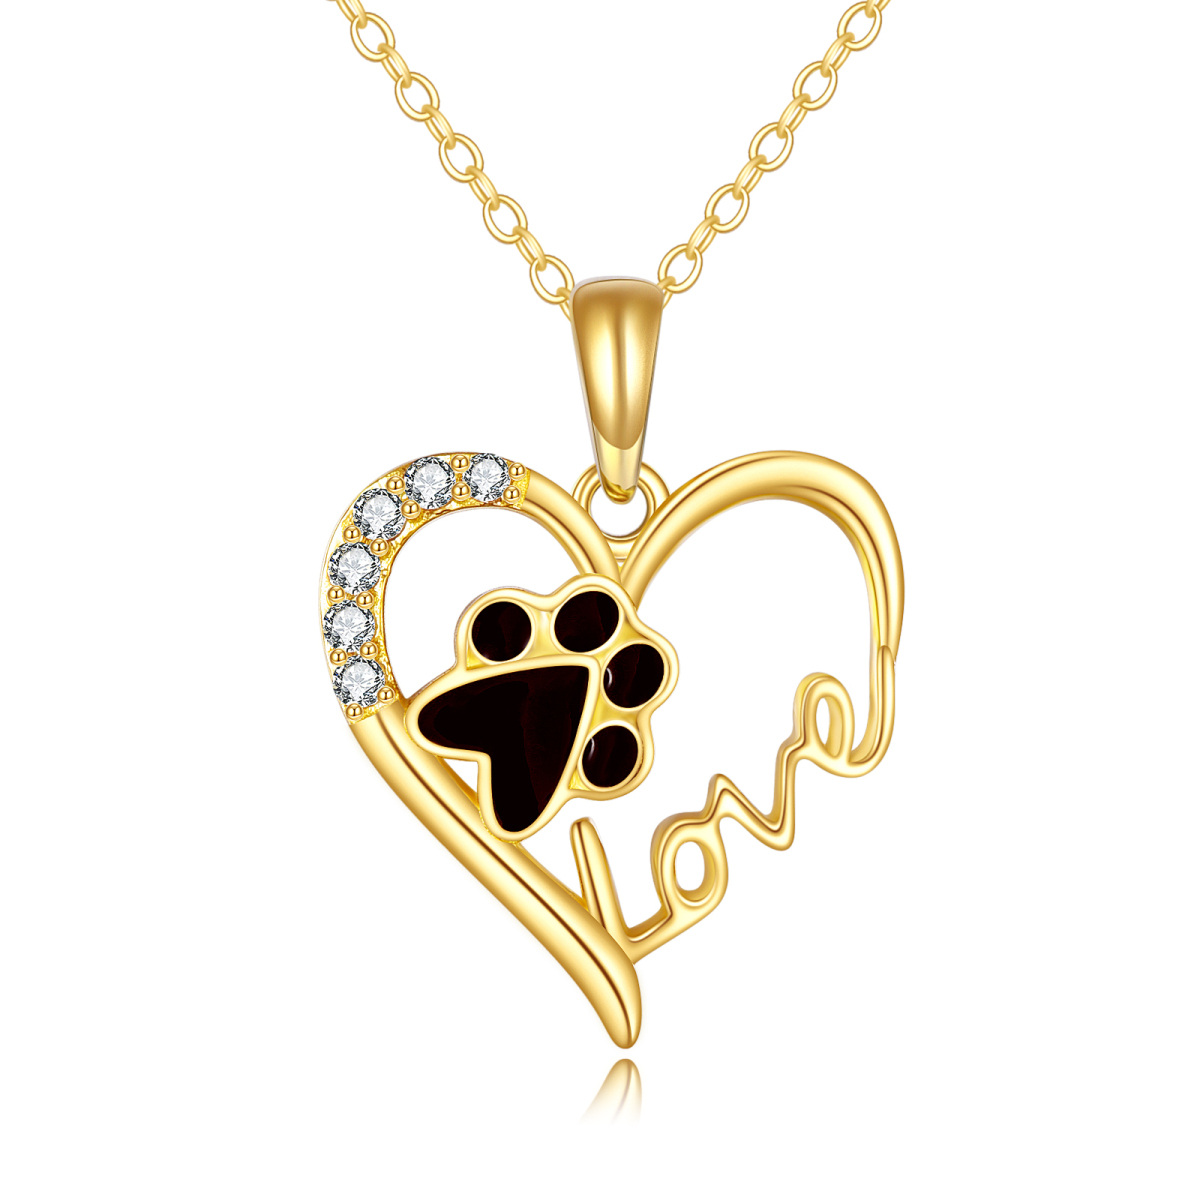 10K Gold Paw & Heart Pendant Necklace with Engraved Word-1